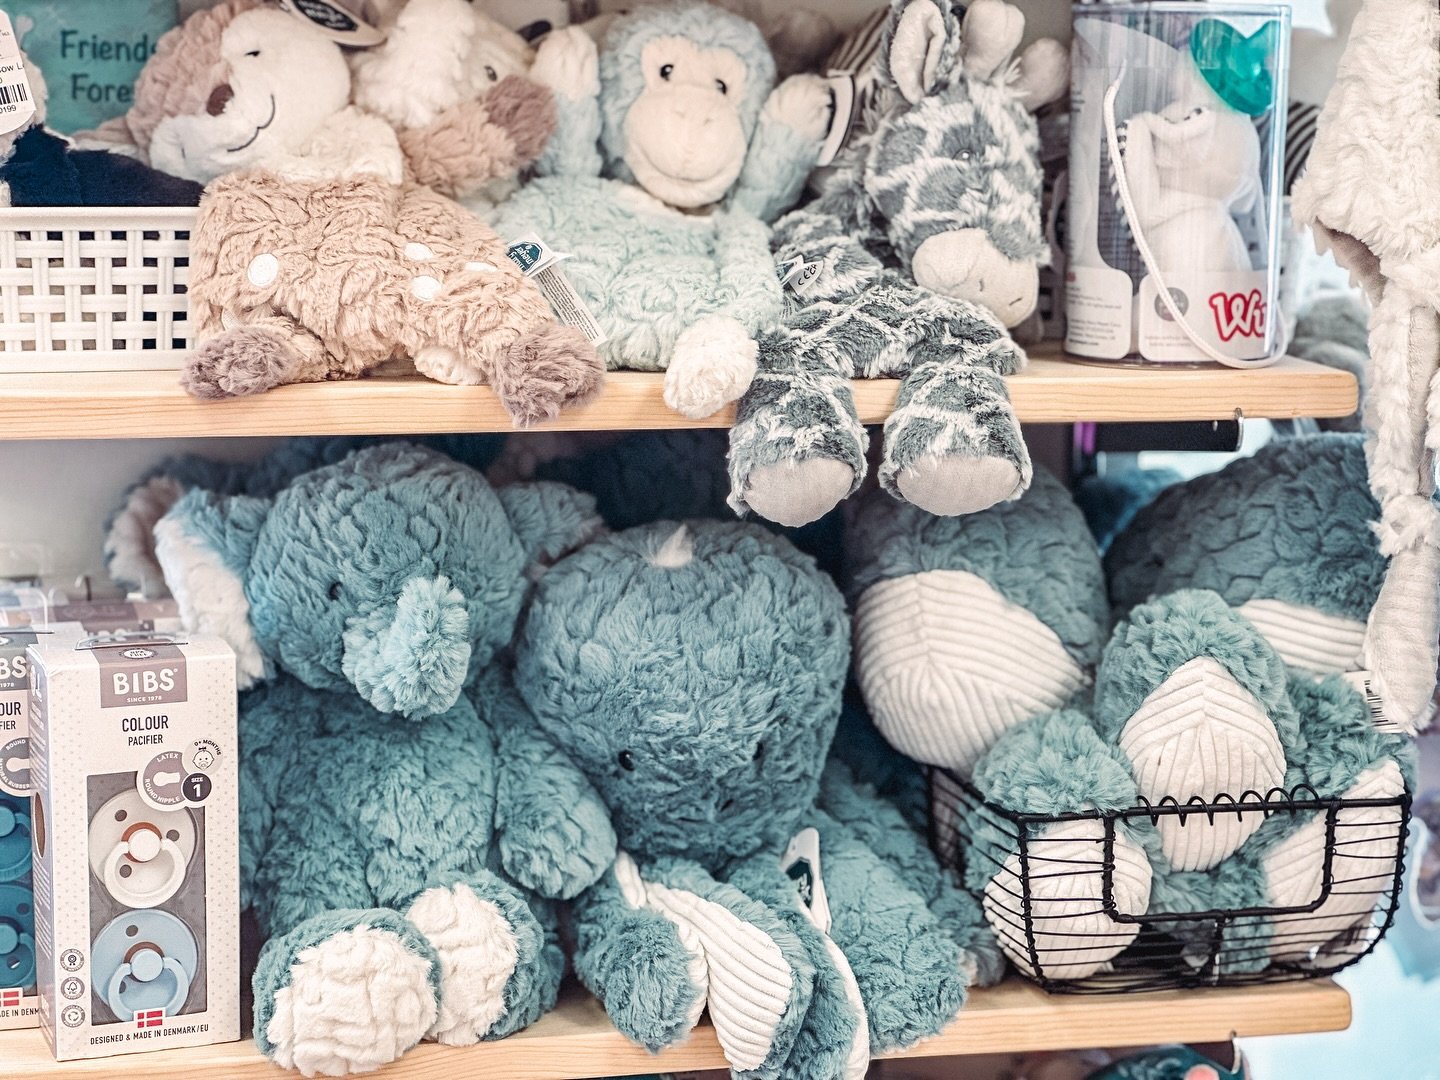 Needing the perfect stuffed animal for their nursery or baby shower gift? Shop in store or online 24/7! Local pick up &amp; shipping options available! 

#firstglimpsebr #shoplocal #3dultrasound #4dultrasound #sonogram #babyboutique #babystore